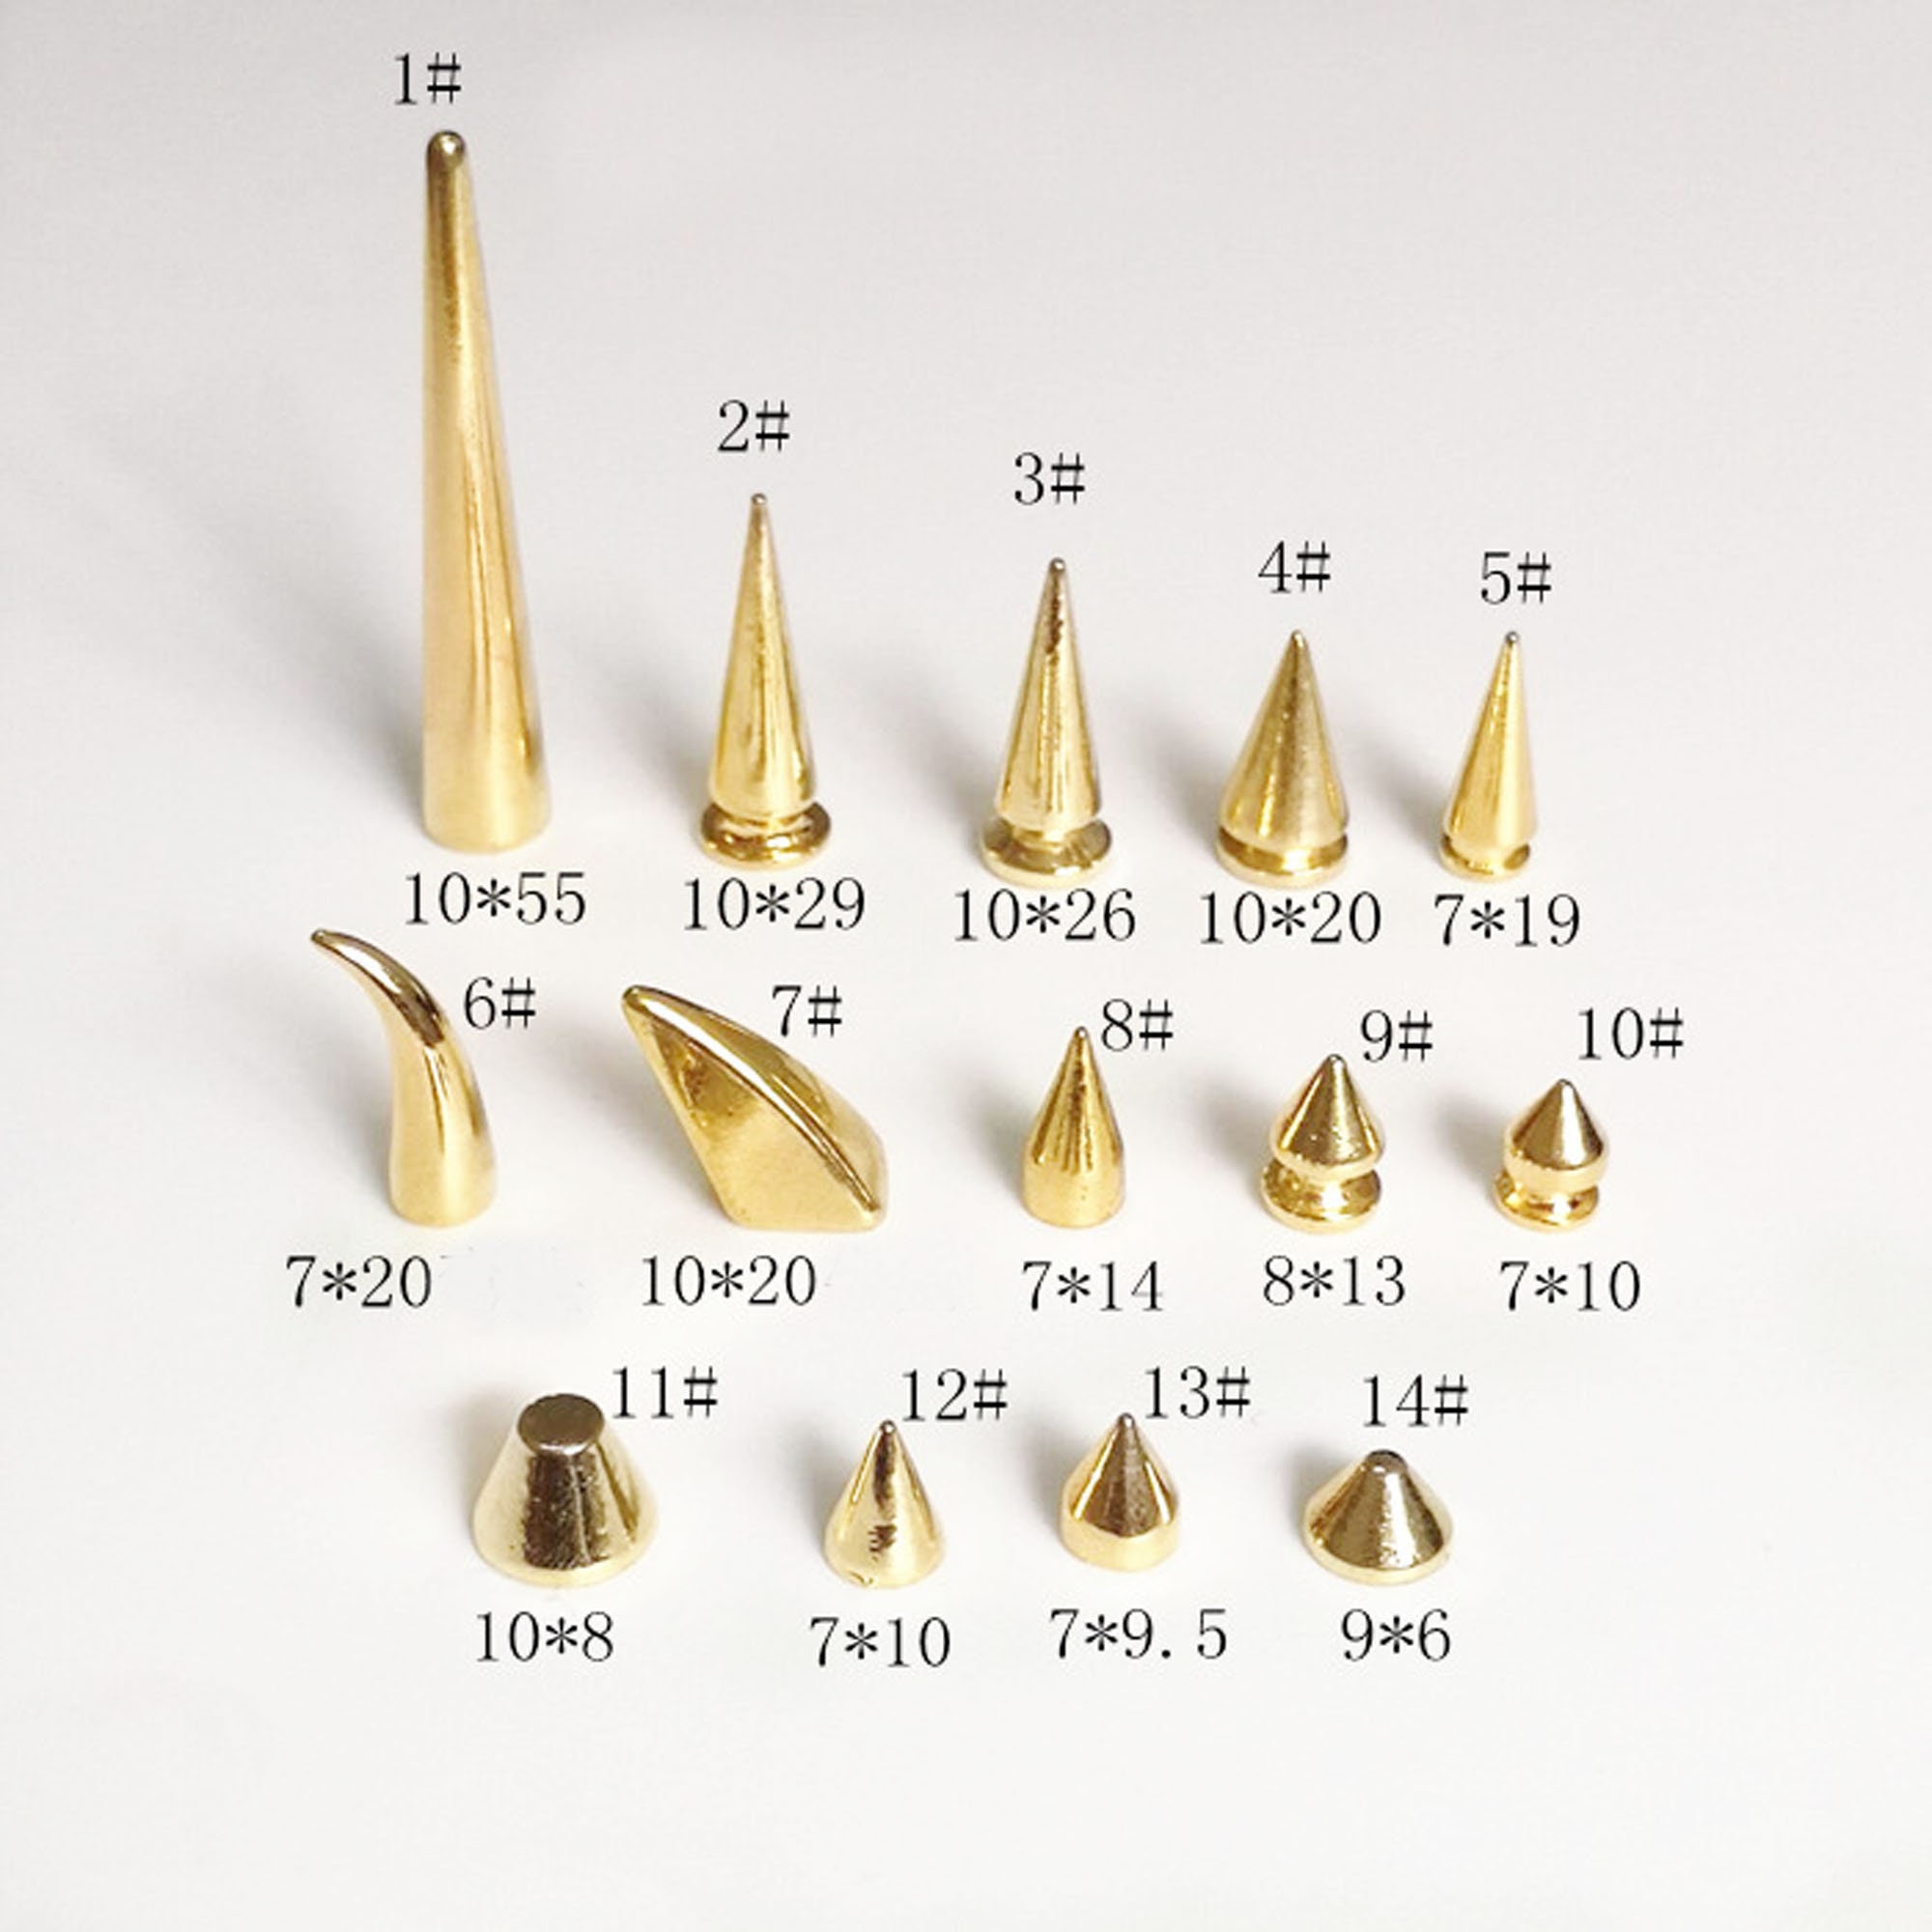 Screwback Spikes, Electroplated Carbon Steel Easy Mounting 100 Sets  Clothing Spikes for Clothes